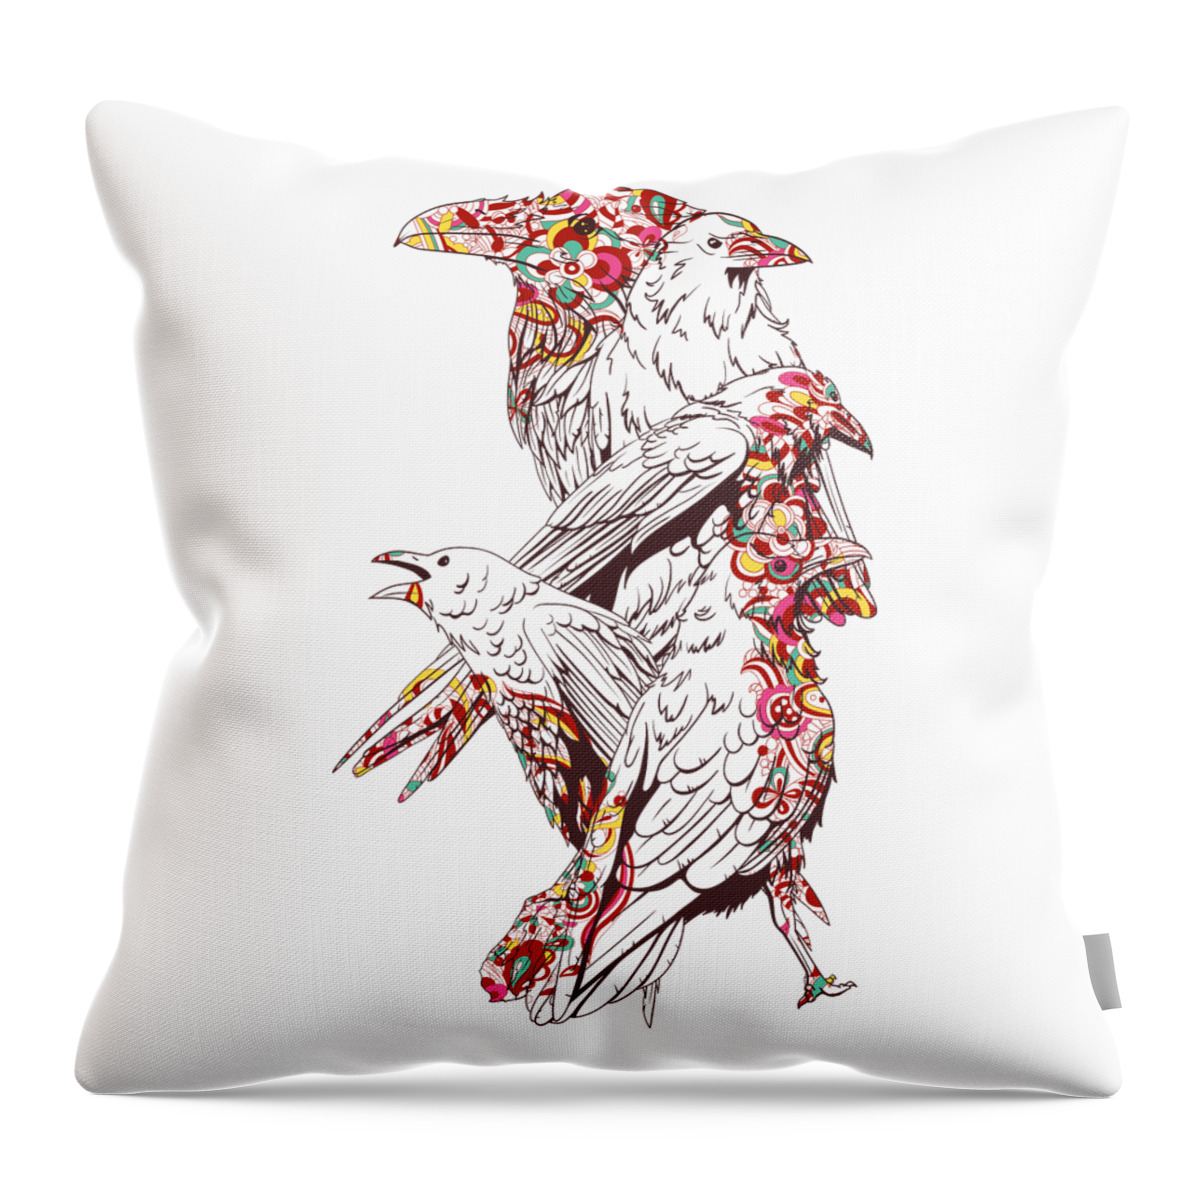 Colorful Throw Pillow featuring the digital art Floral Bird by Jacob Zelazny